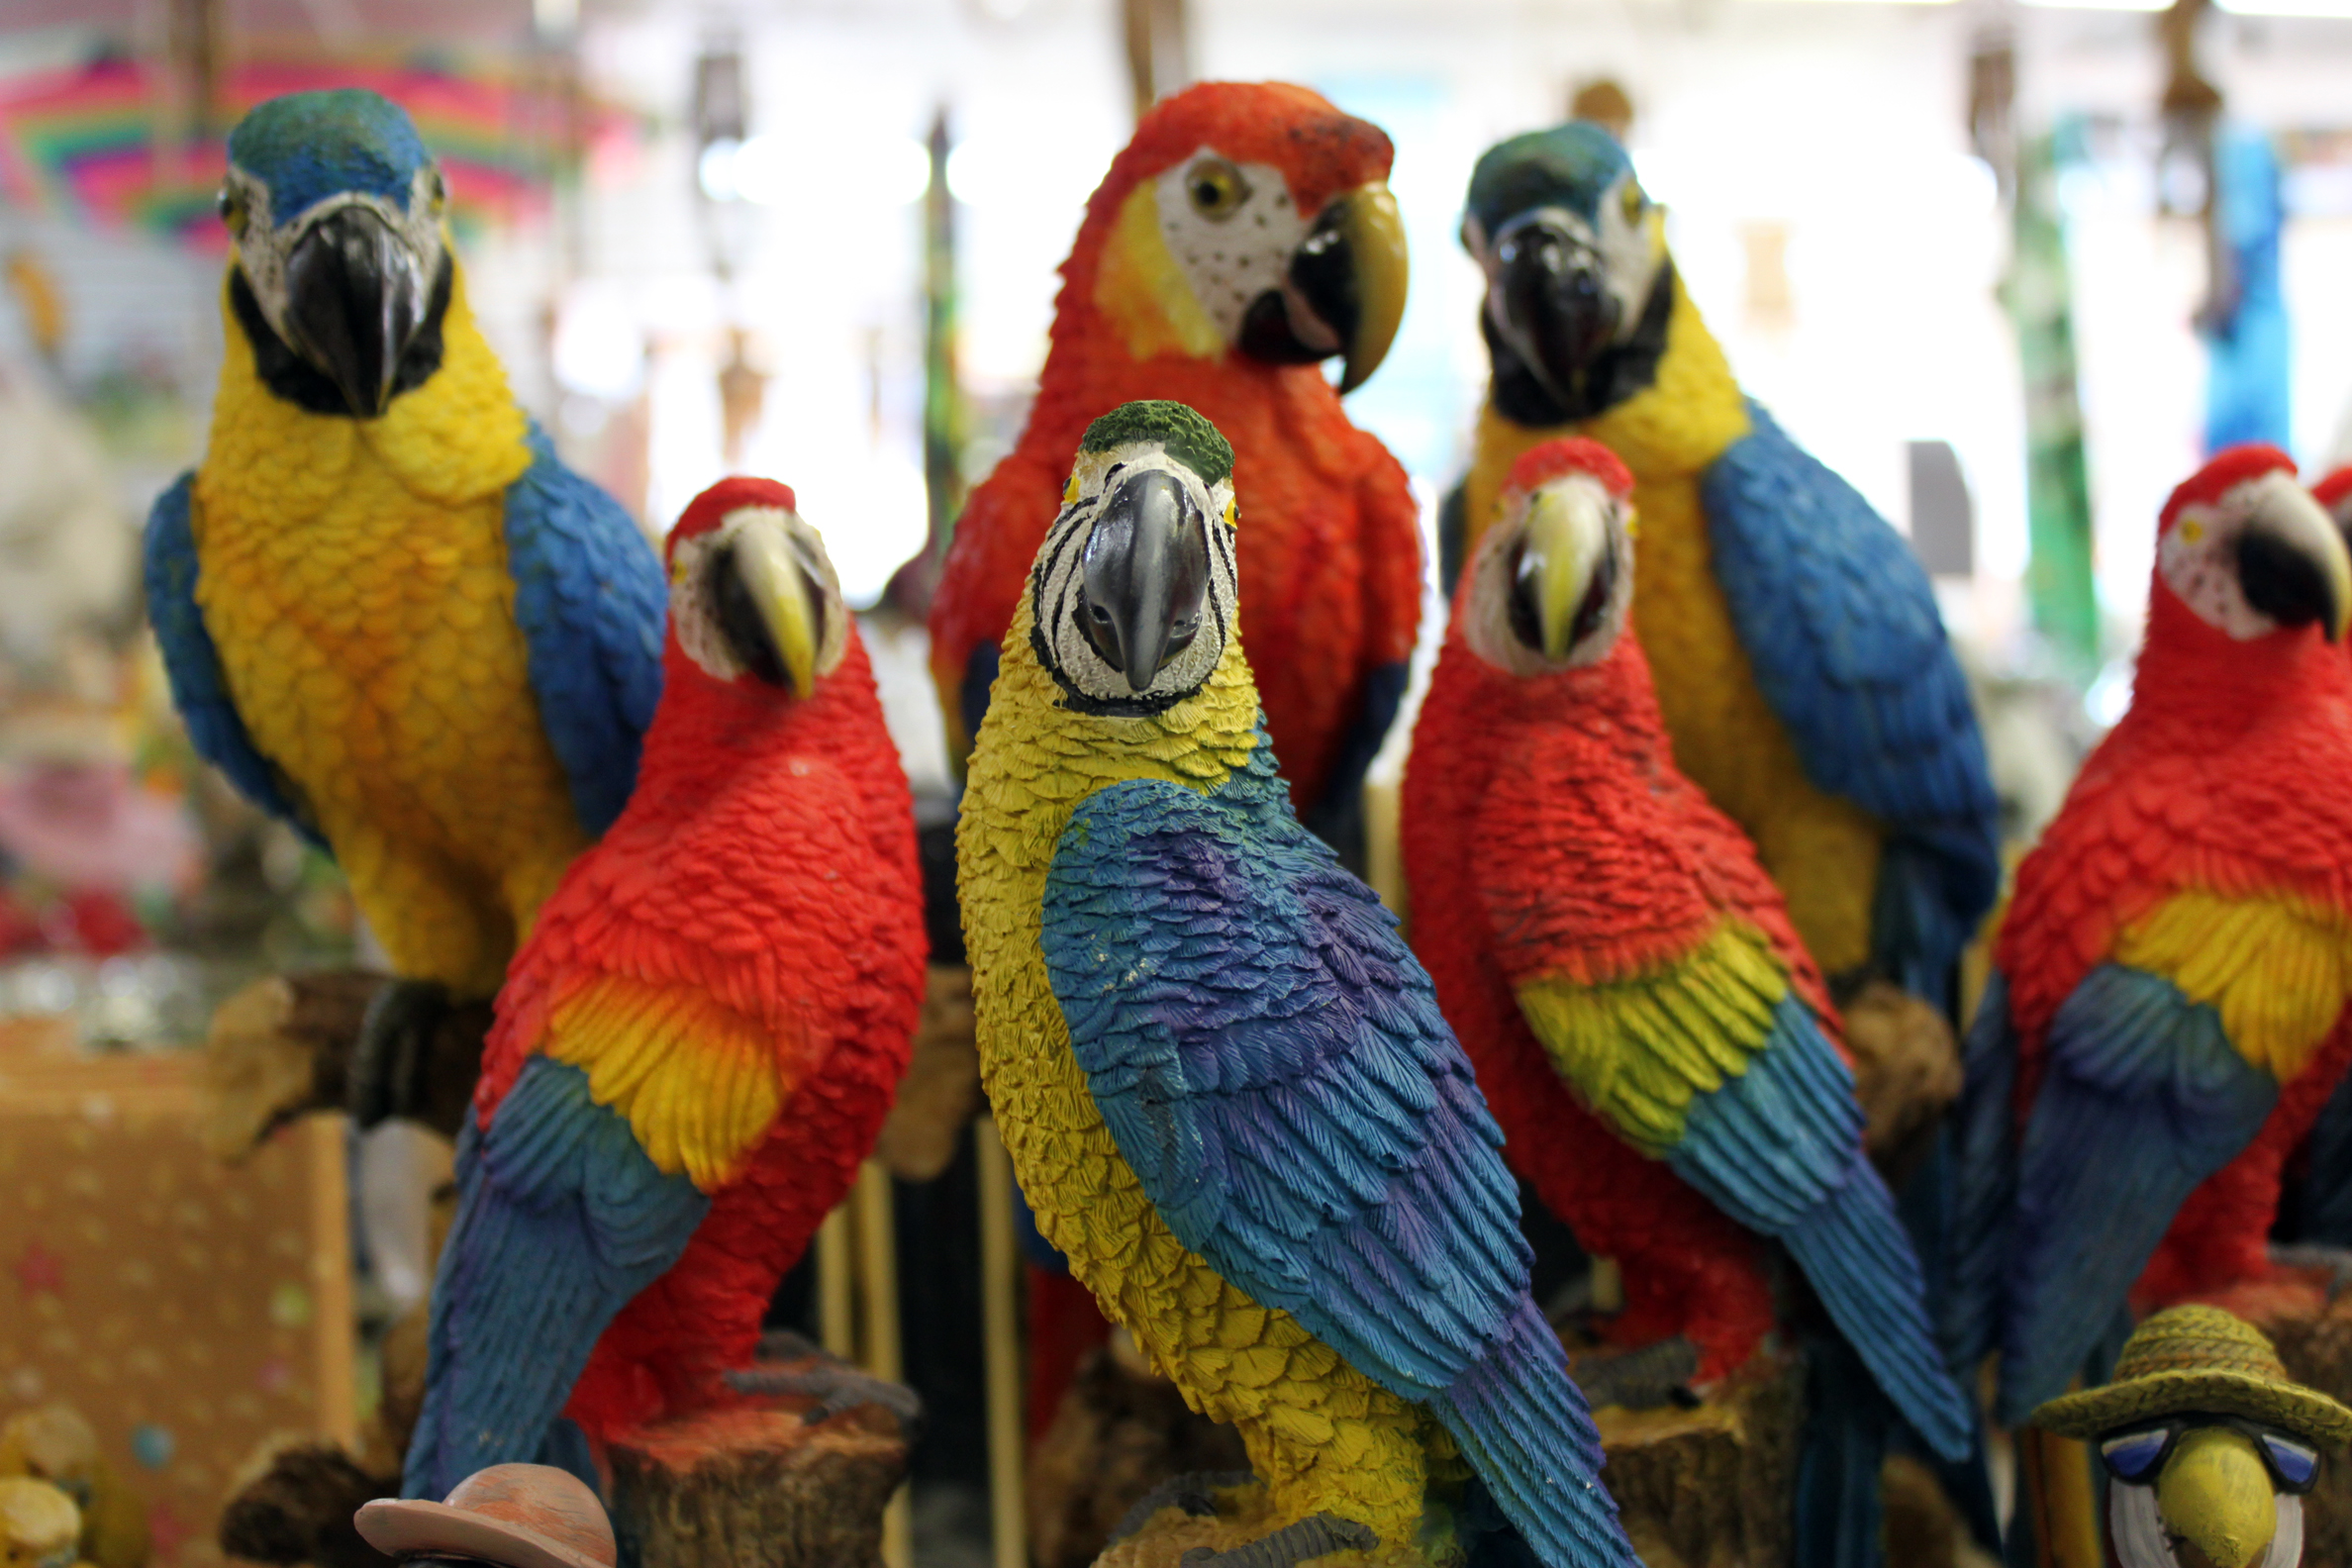 Download PC Wallpaper animal, macaw, bird, blue and yellow macaw, parrot, scarlet macaw, toy, birds